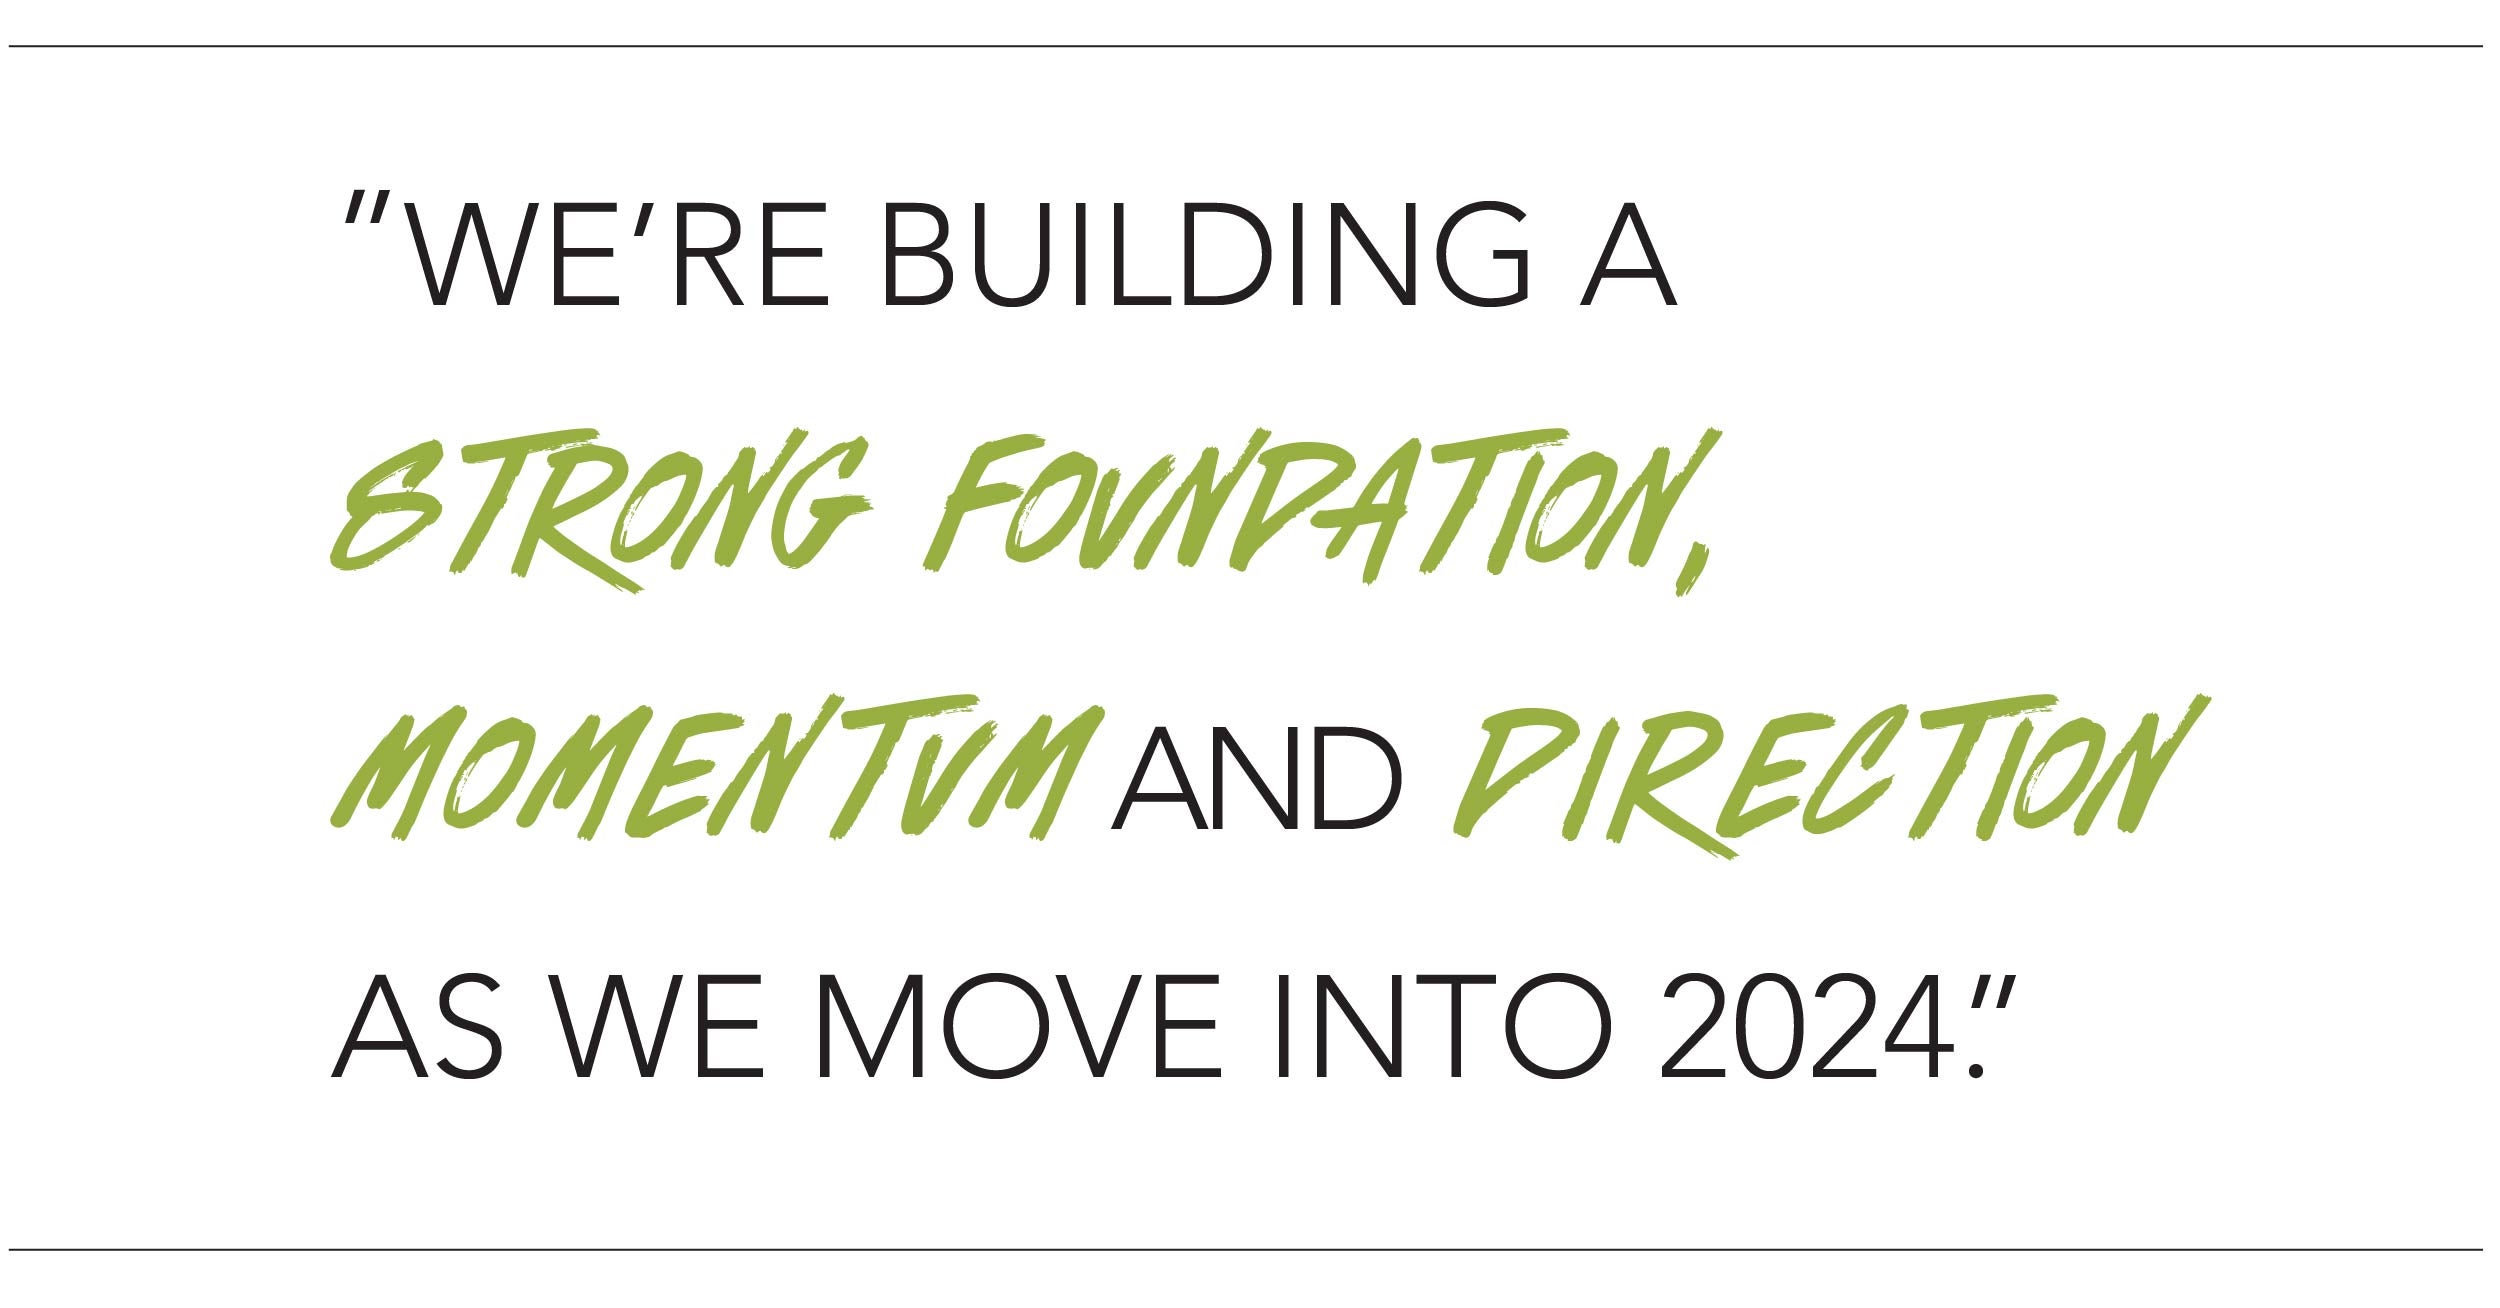 We're building a strong foundation, momentum and direction as we move into 2024.